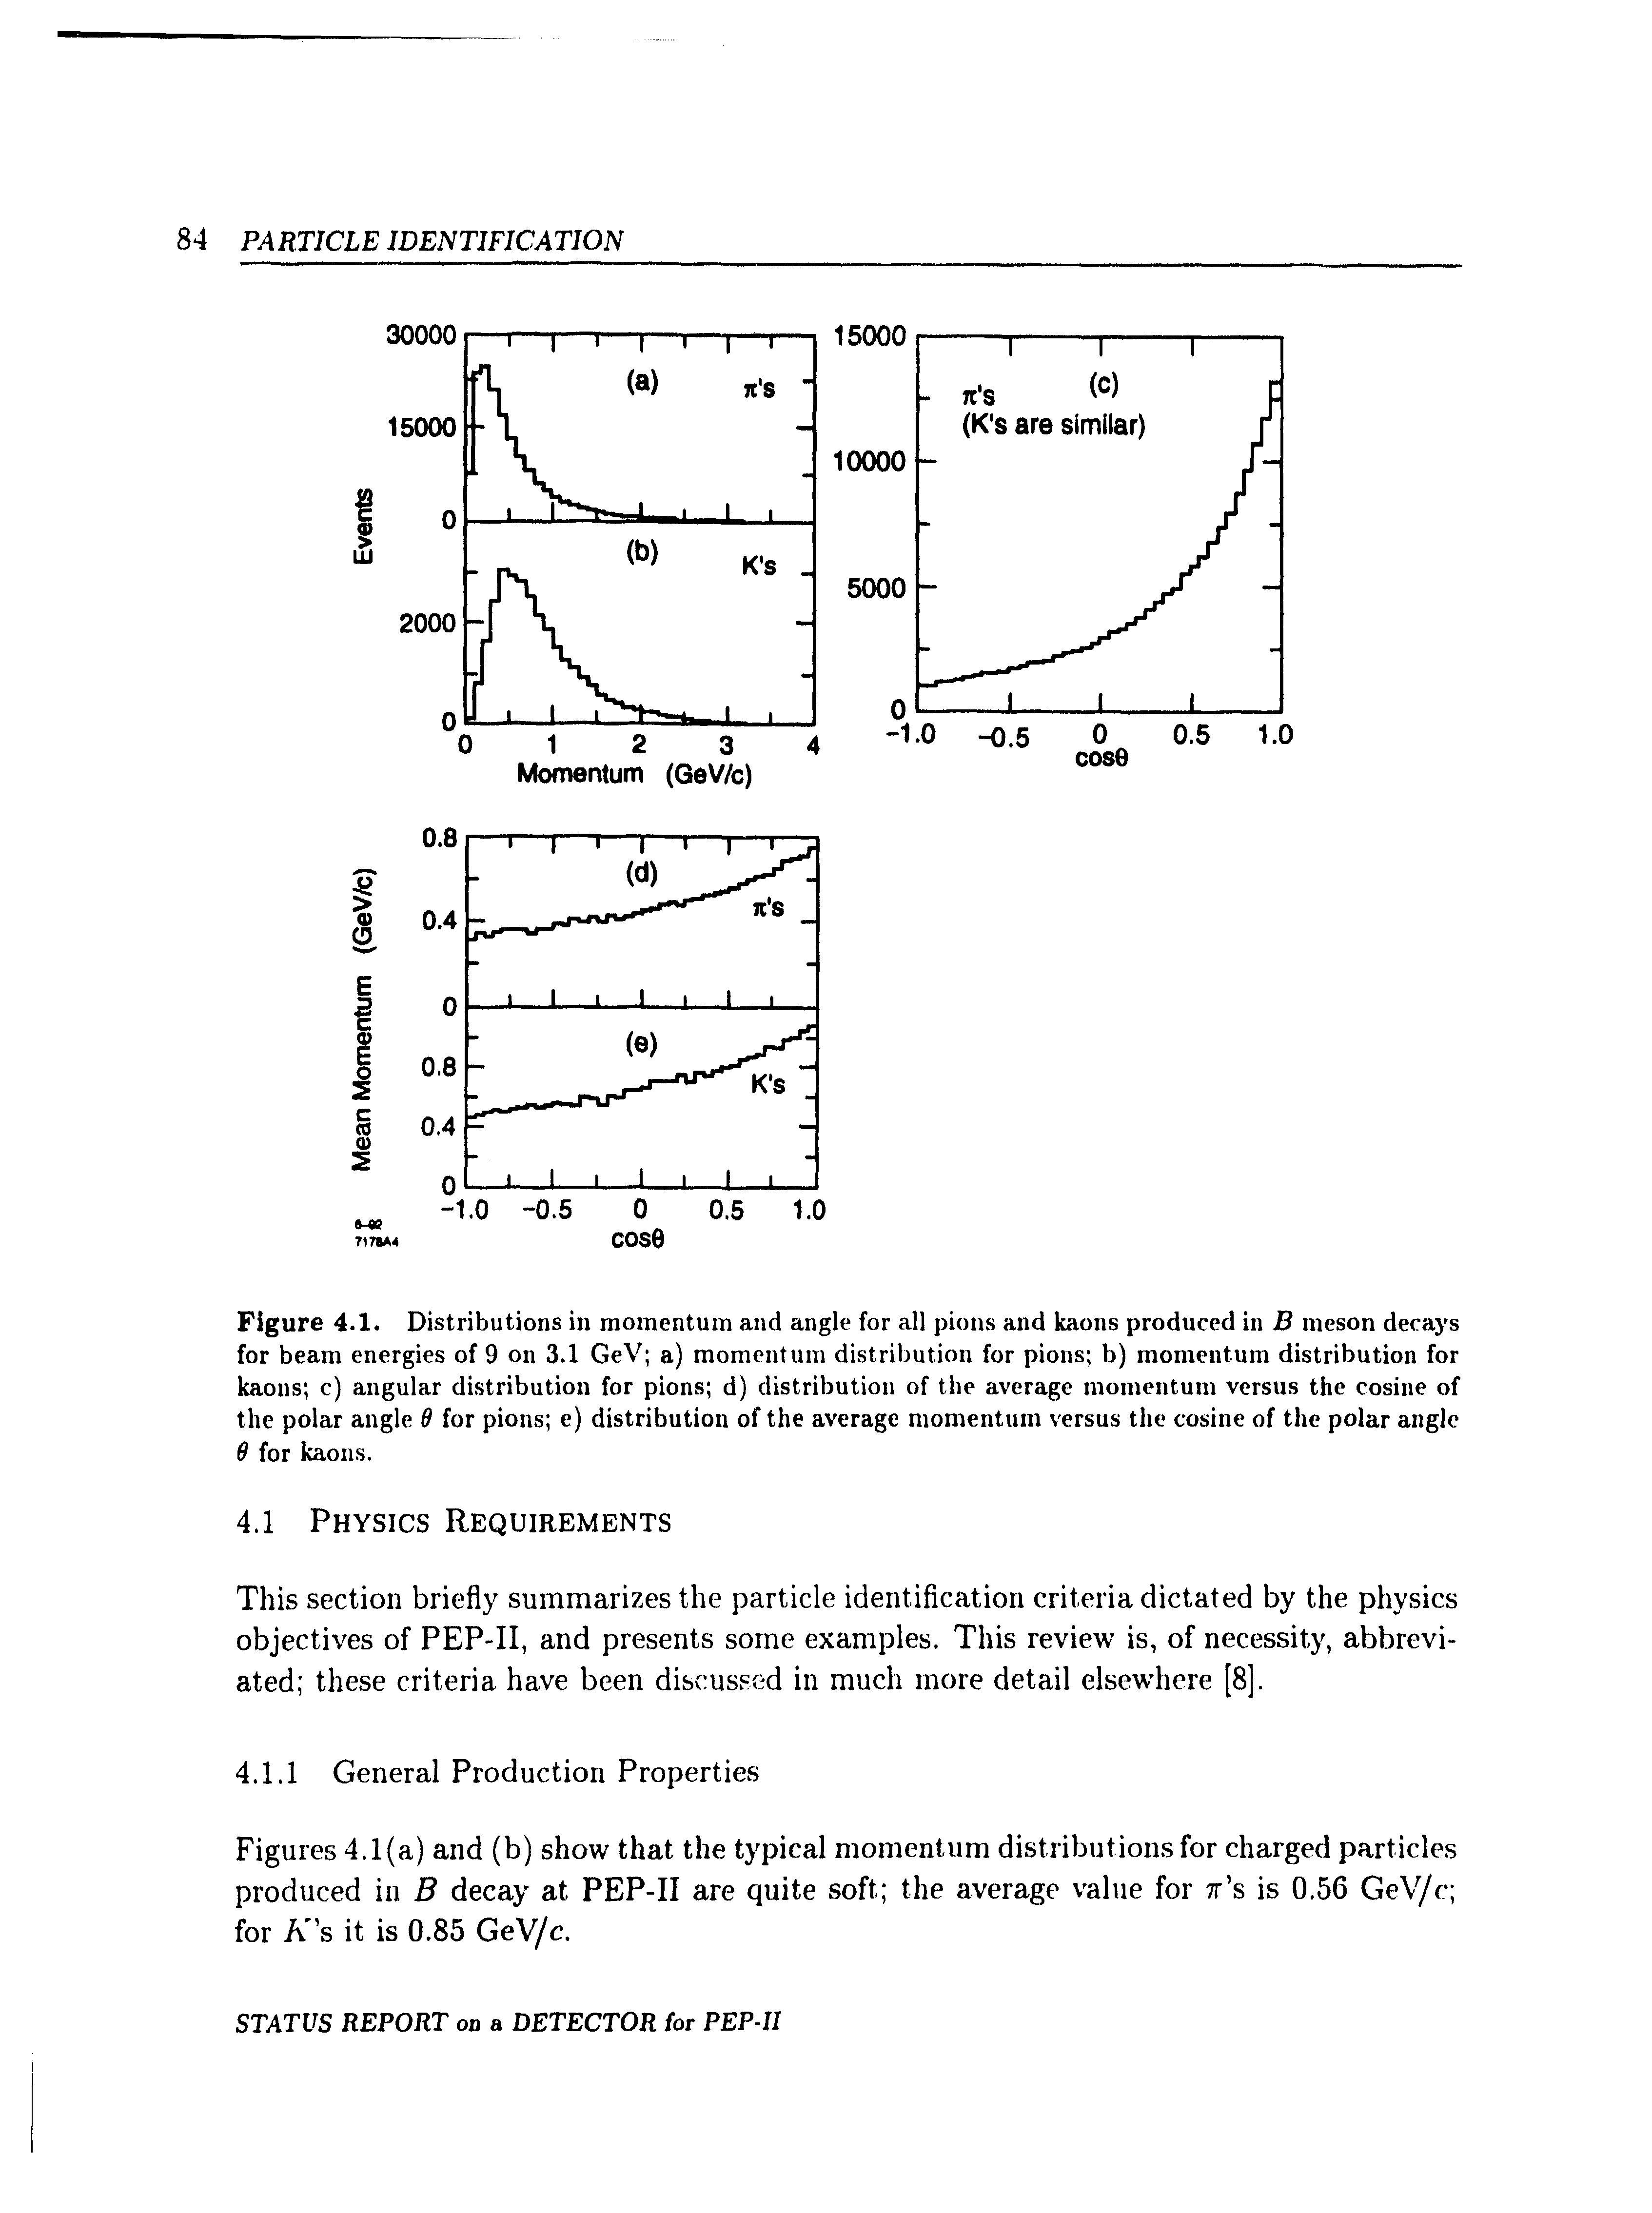 Figure 4.1. Distributions in momentum and angle for all pious and kaons produced in B meson decays for beam energies of 9 on 3.1 GeV a) momentum distribution for pions b) momentum distribution for kaons c) angular distribution for pions d) distribution of the average momentum versus the cosine of the polar angle 6 for pions e) distribution of the average momentum versus the cosine of the polar angle 9 for kaons.